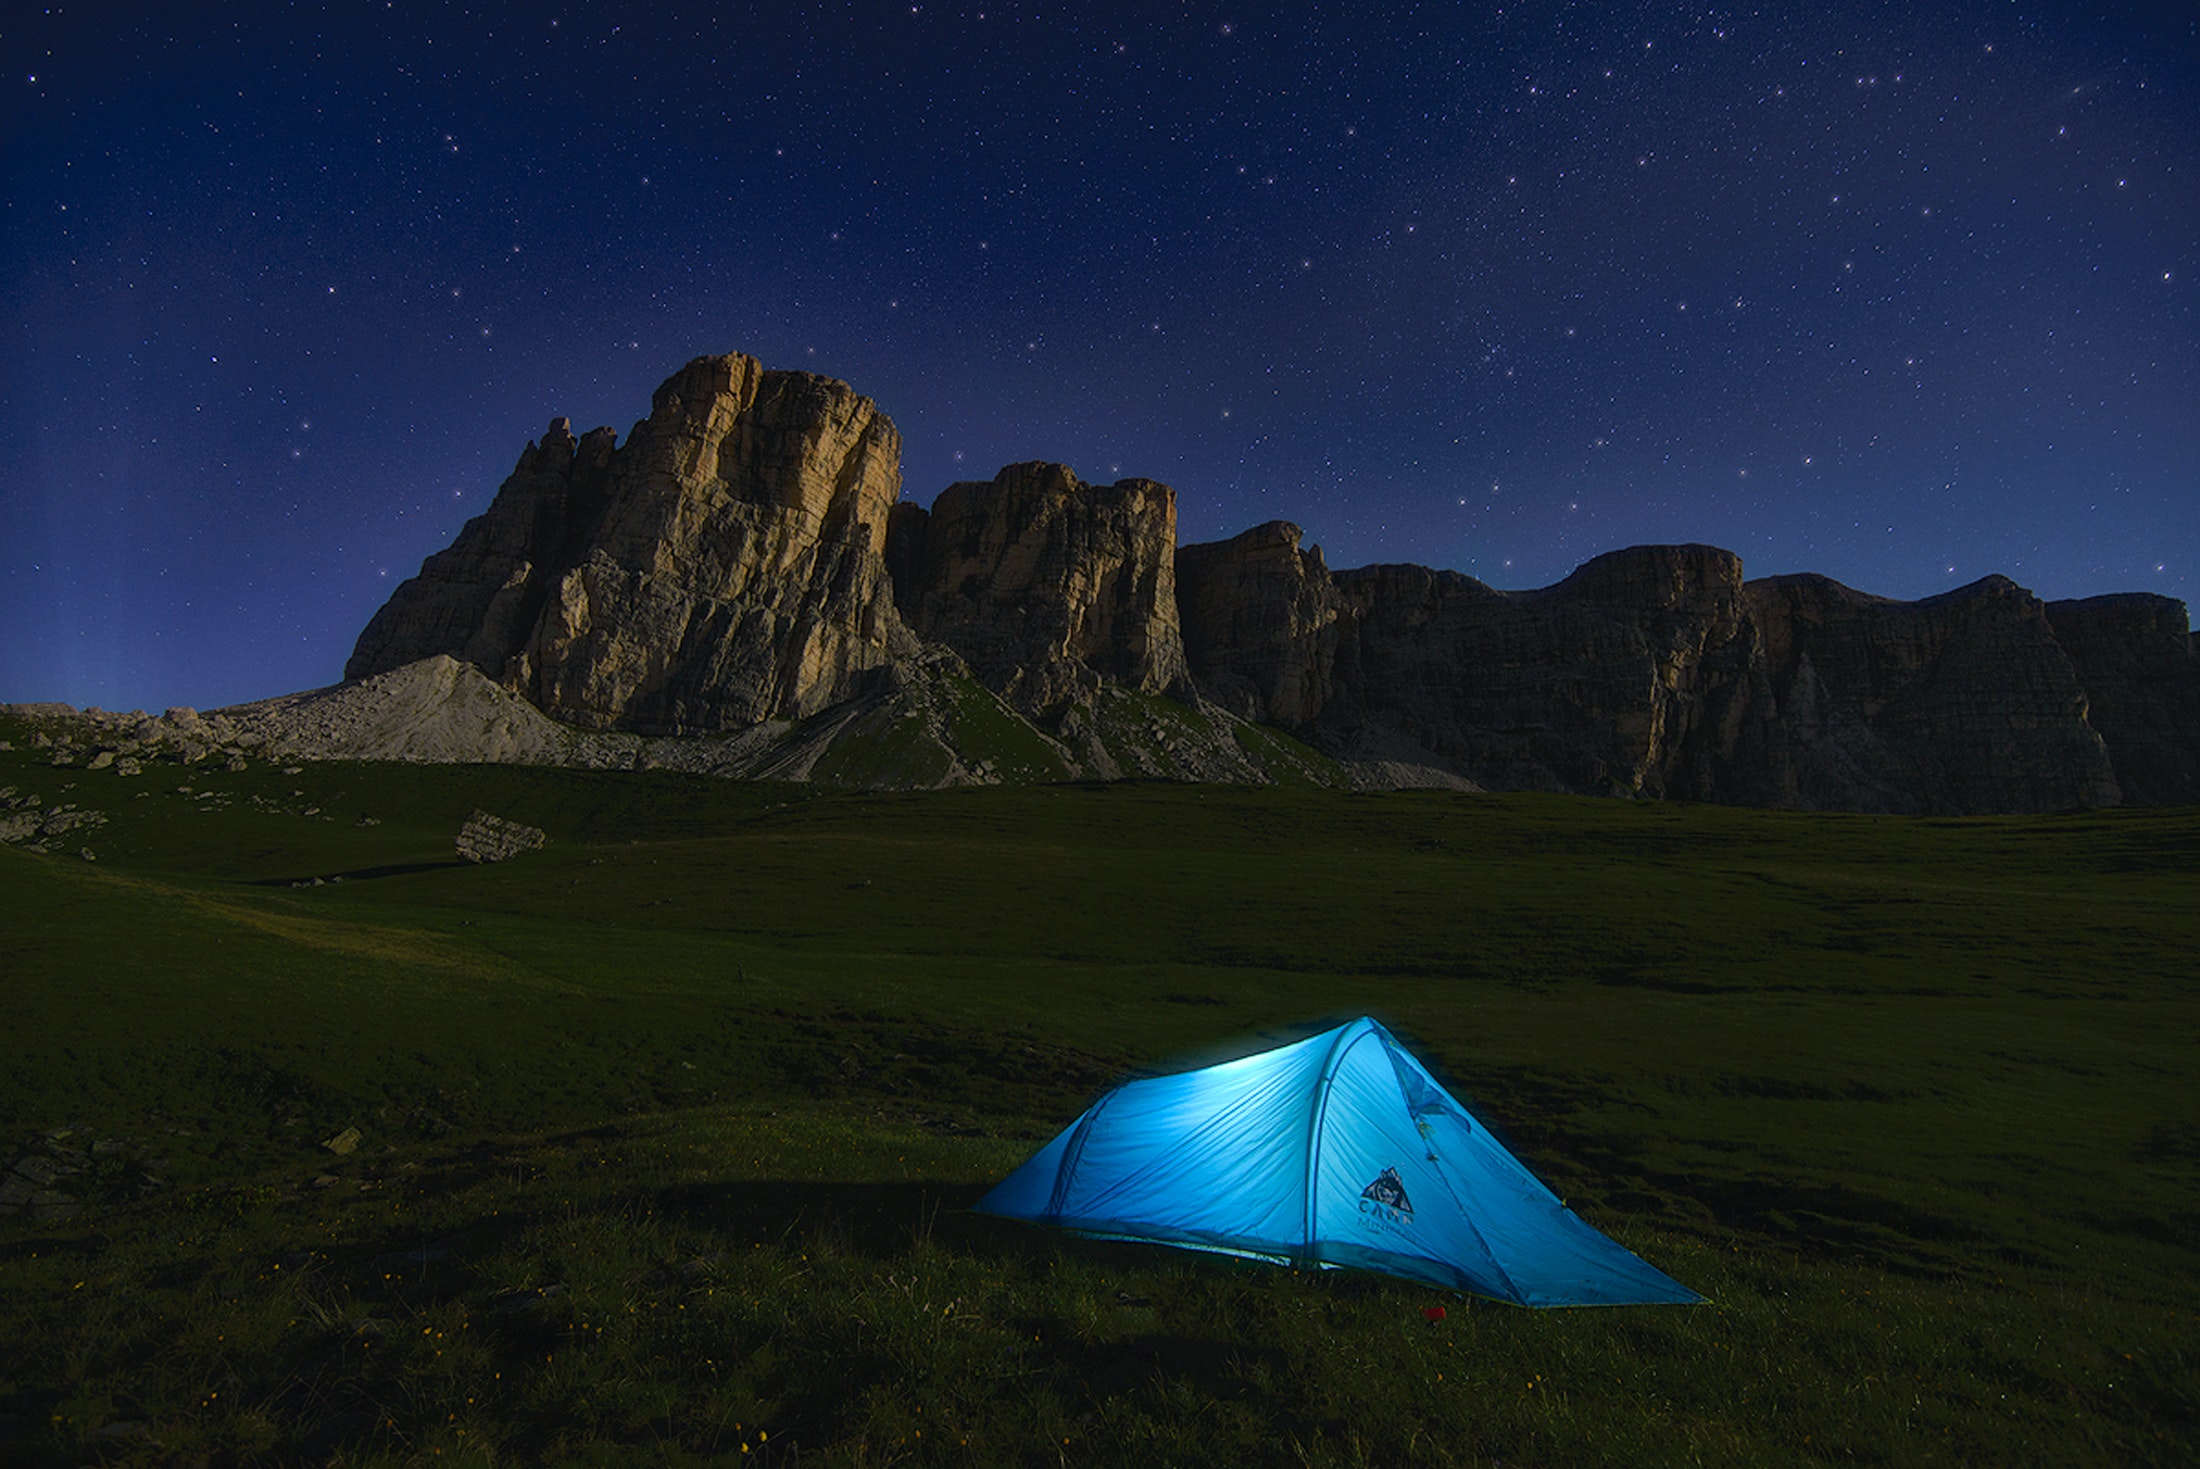 A tent set up at night before mountians